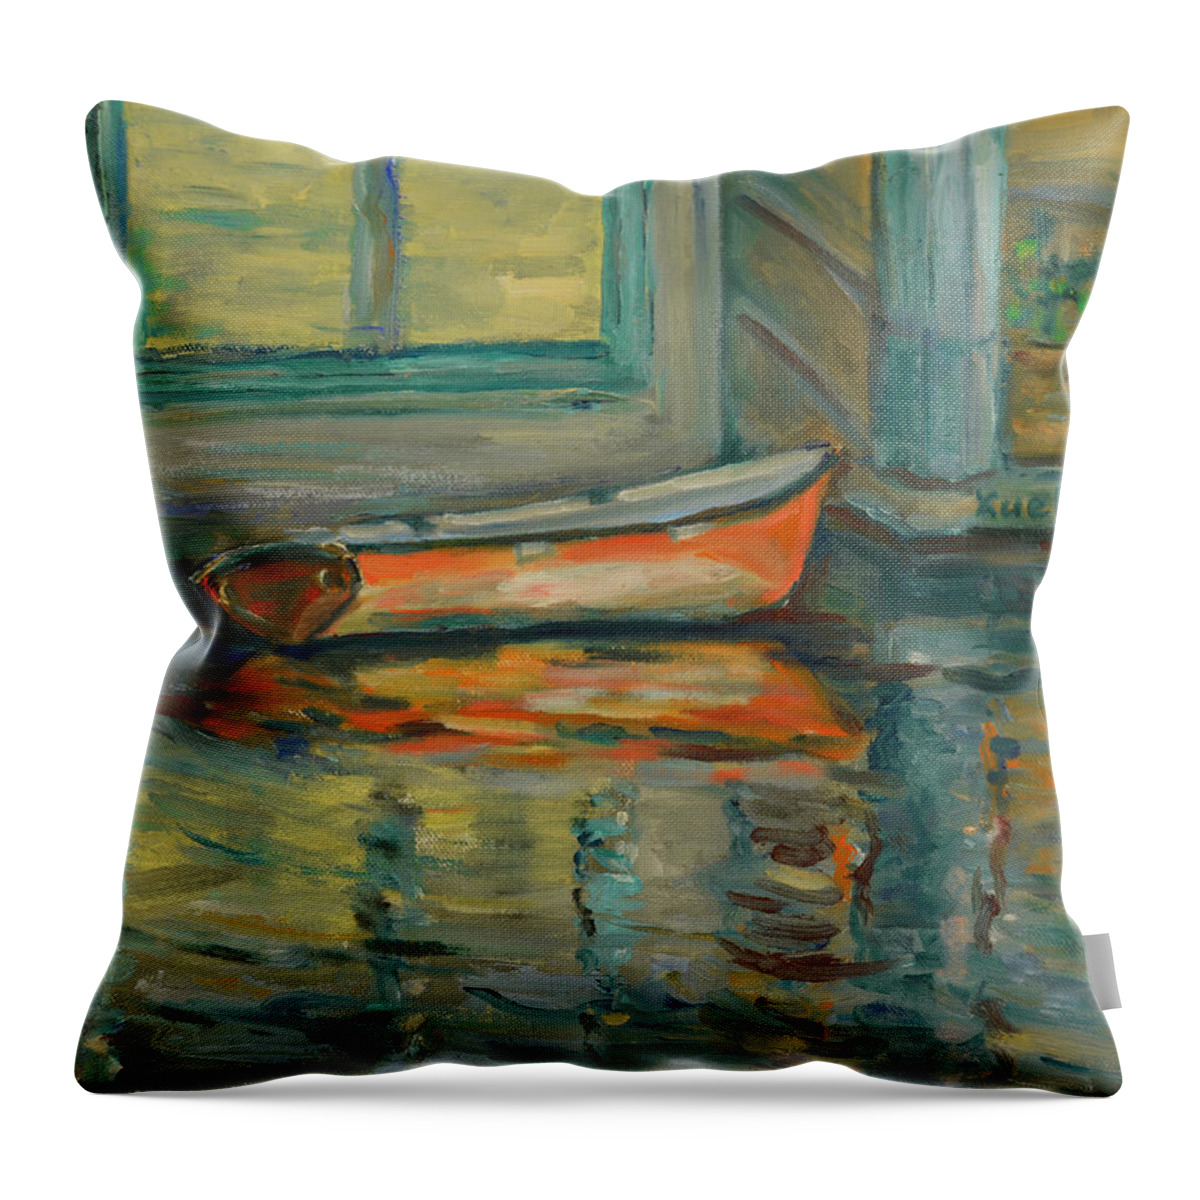 At Boat House Throw Pillow featuring the painting At Boat House 2 by Xueling Zou